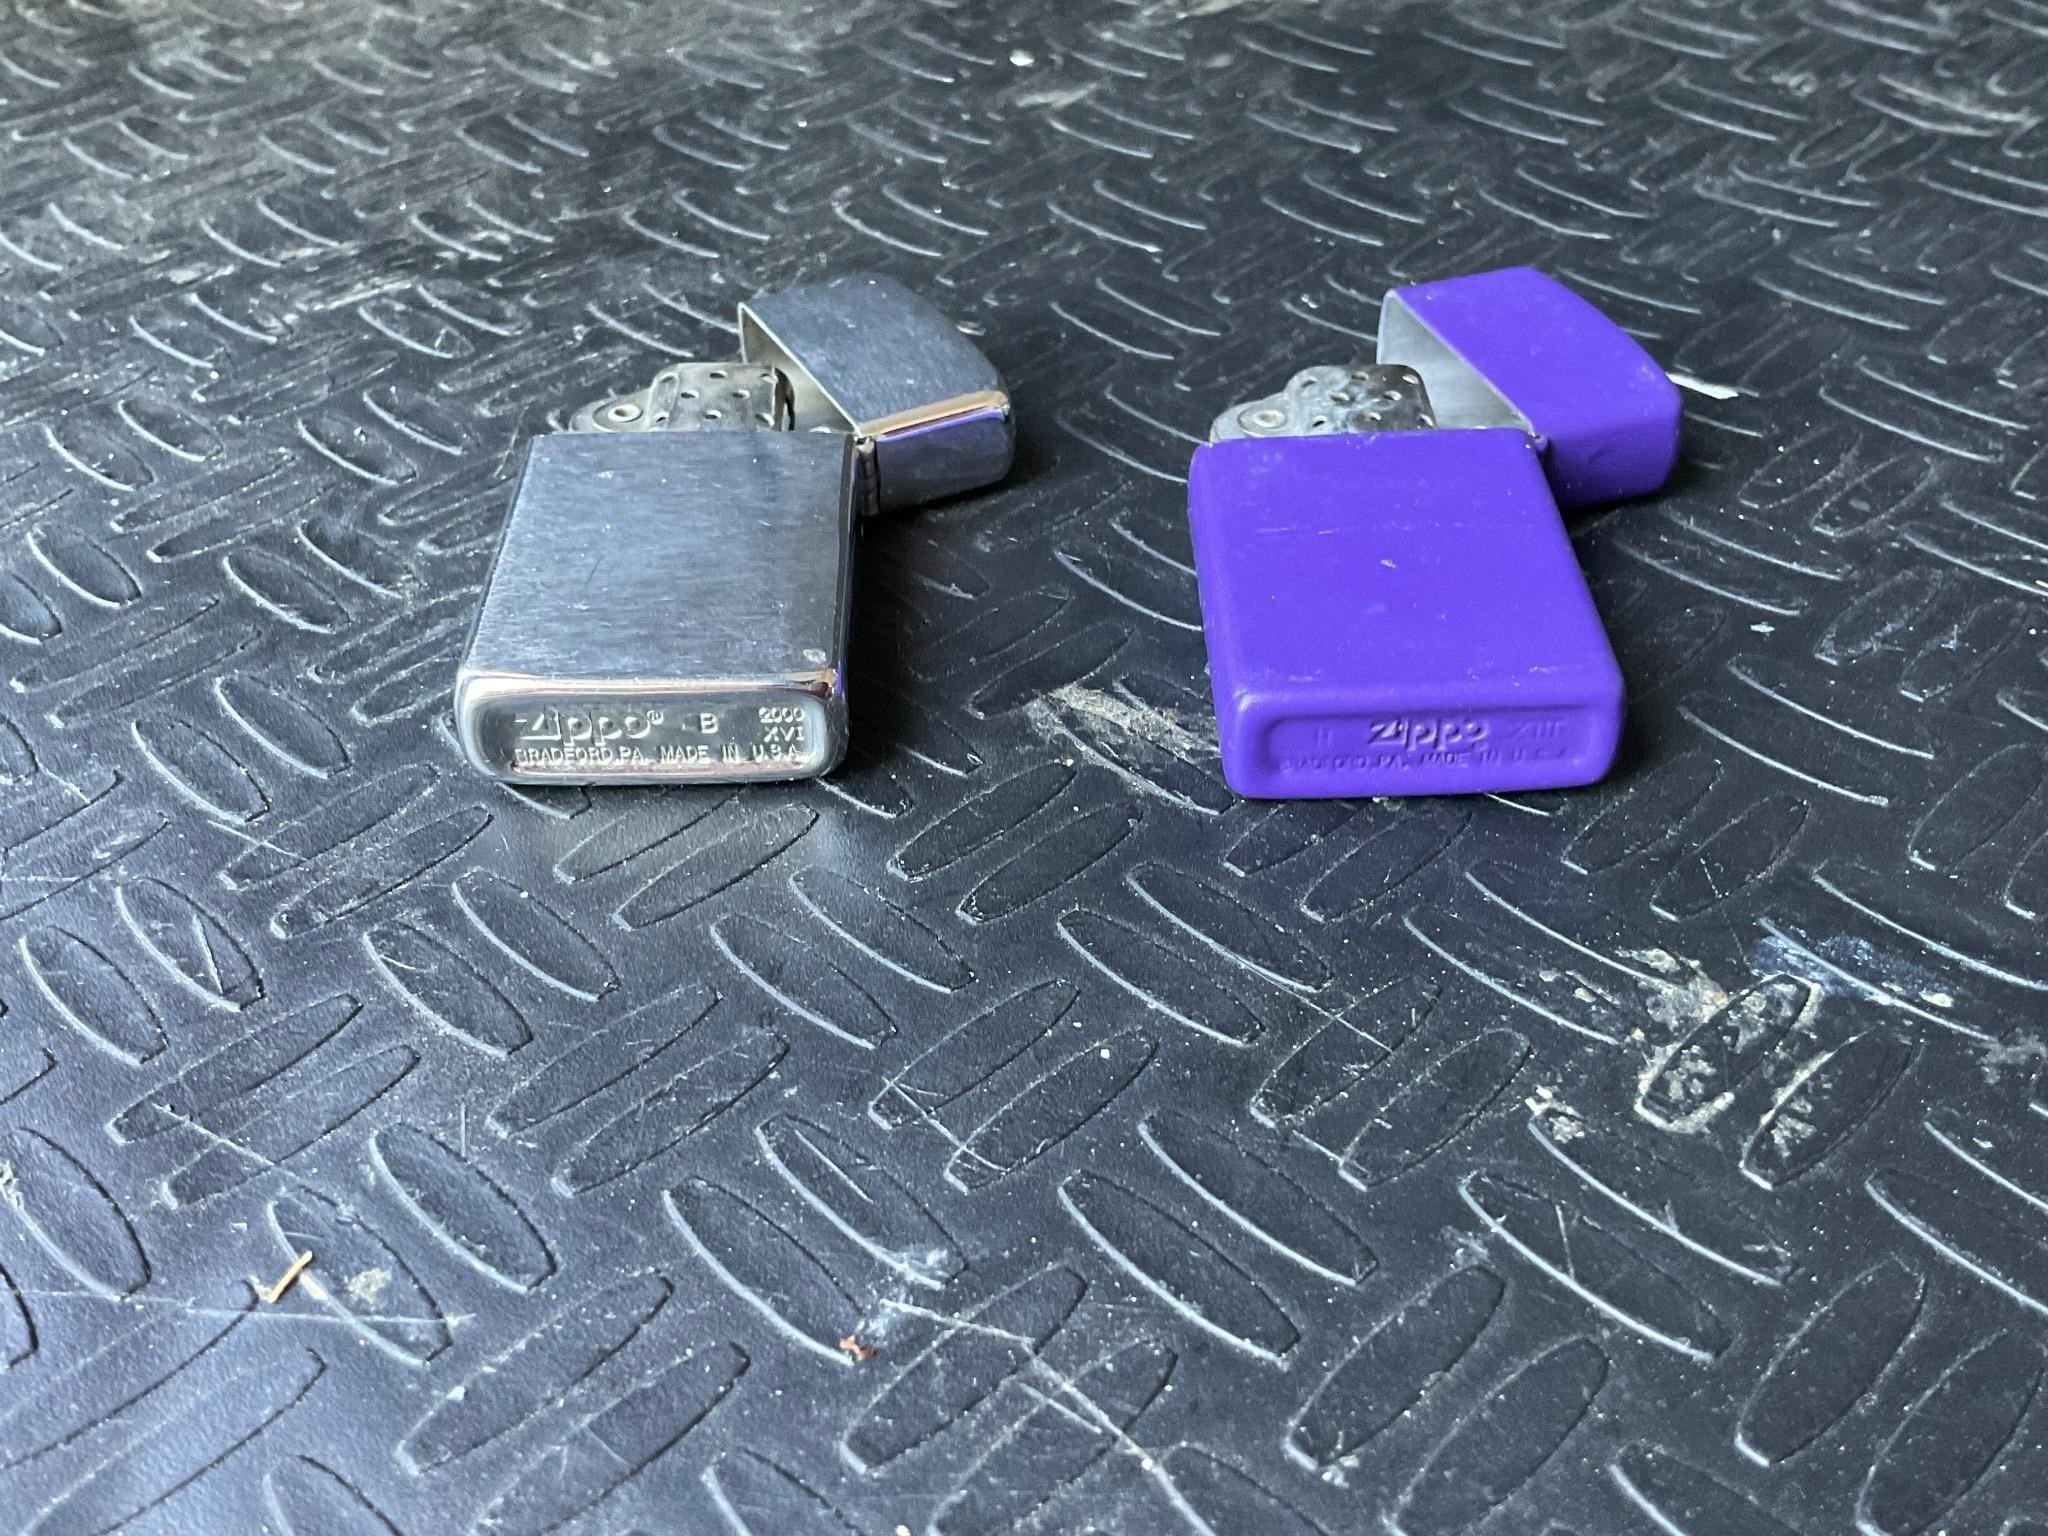 Slightly smaller silver and purple zippo lighters